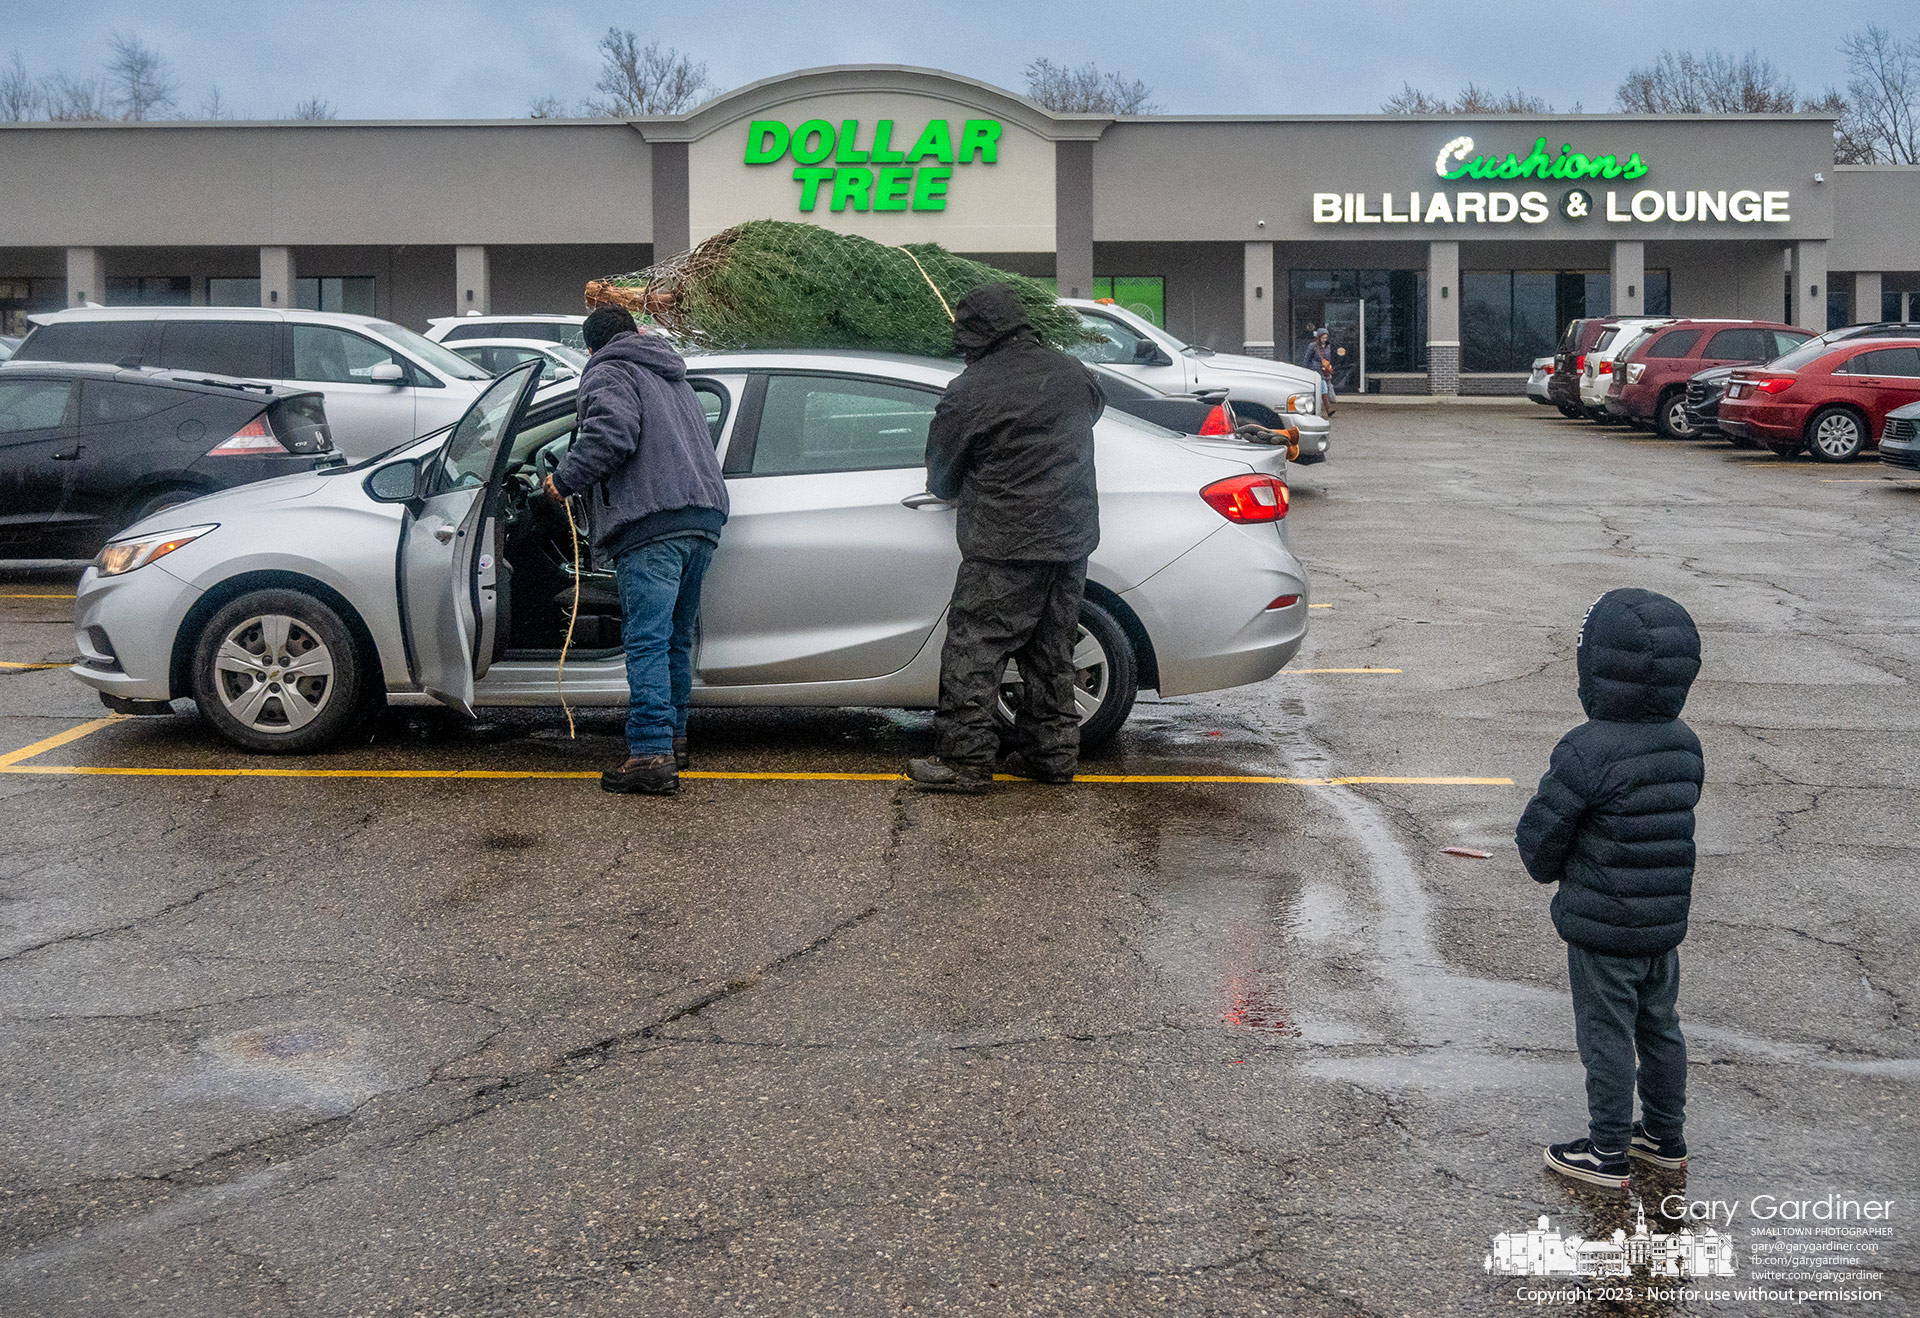 A young boy watches as the Christmas tree his parent chose for their home is tied to the roof of their car for the trip home. My Final Photo for November 26, 2023.